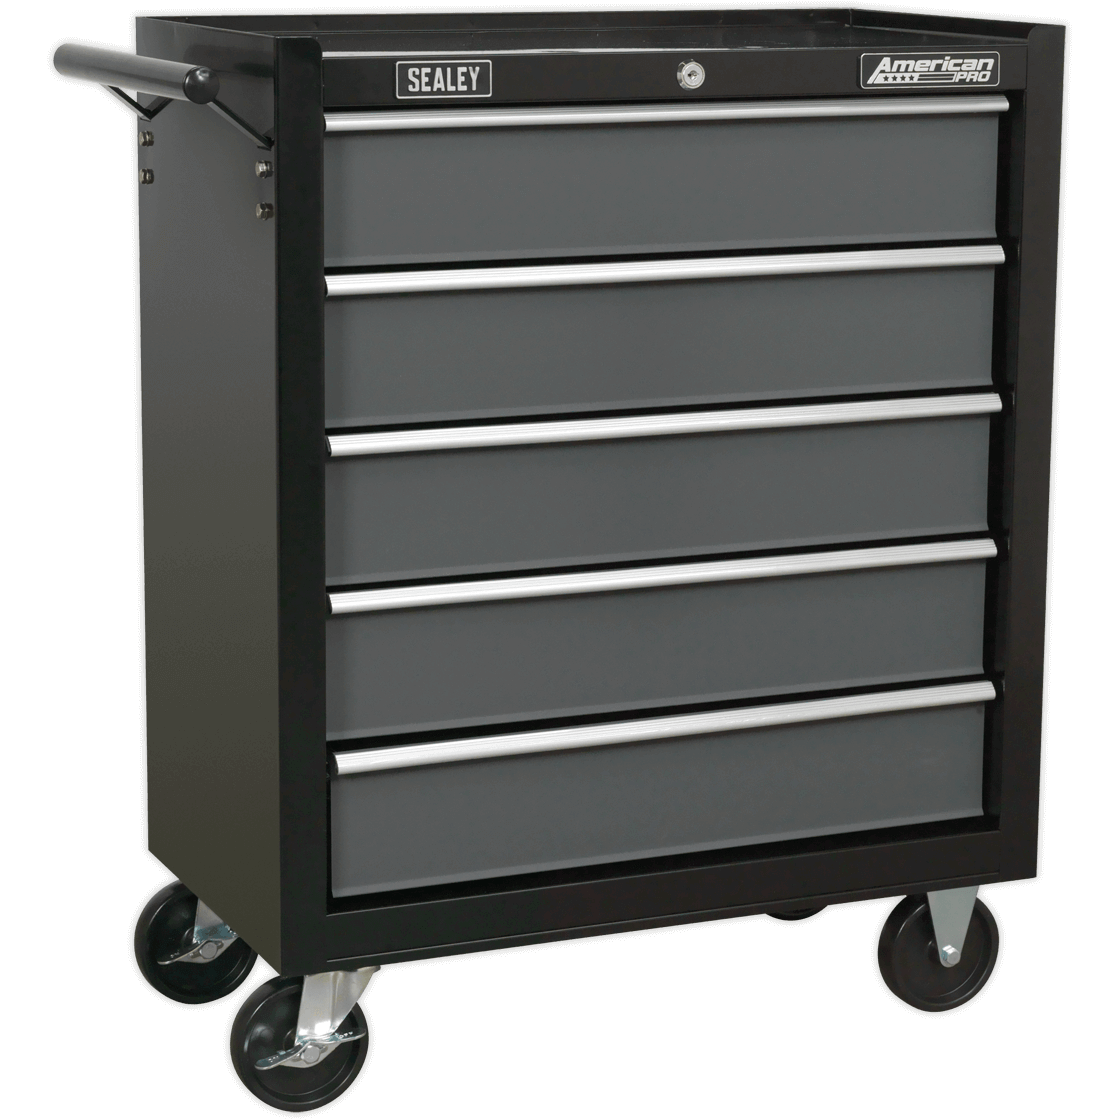 Sealey American Pro 5 Drawer Roller Cabinet Roller Cabinets